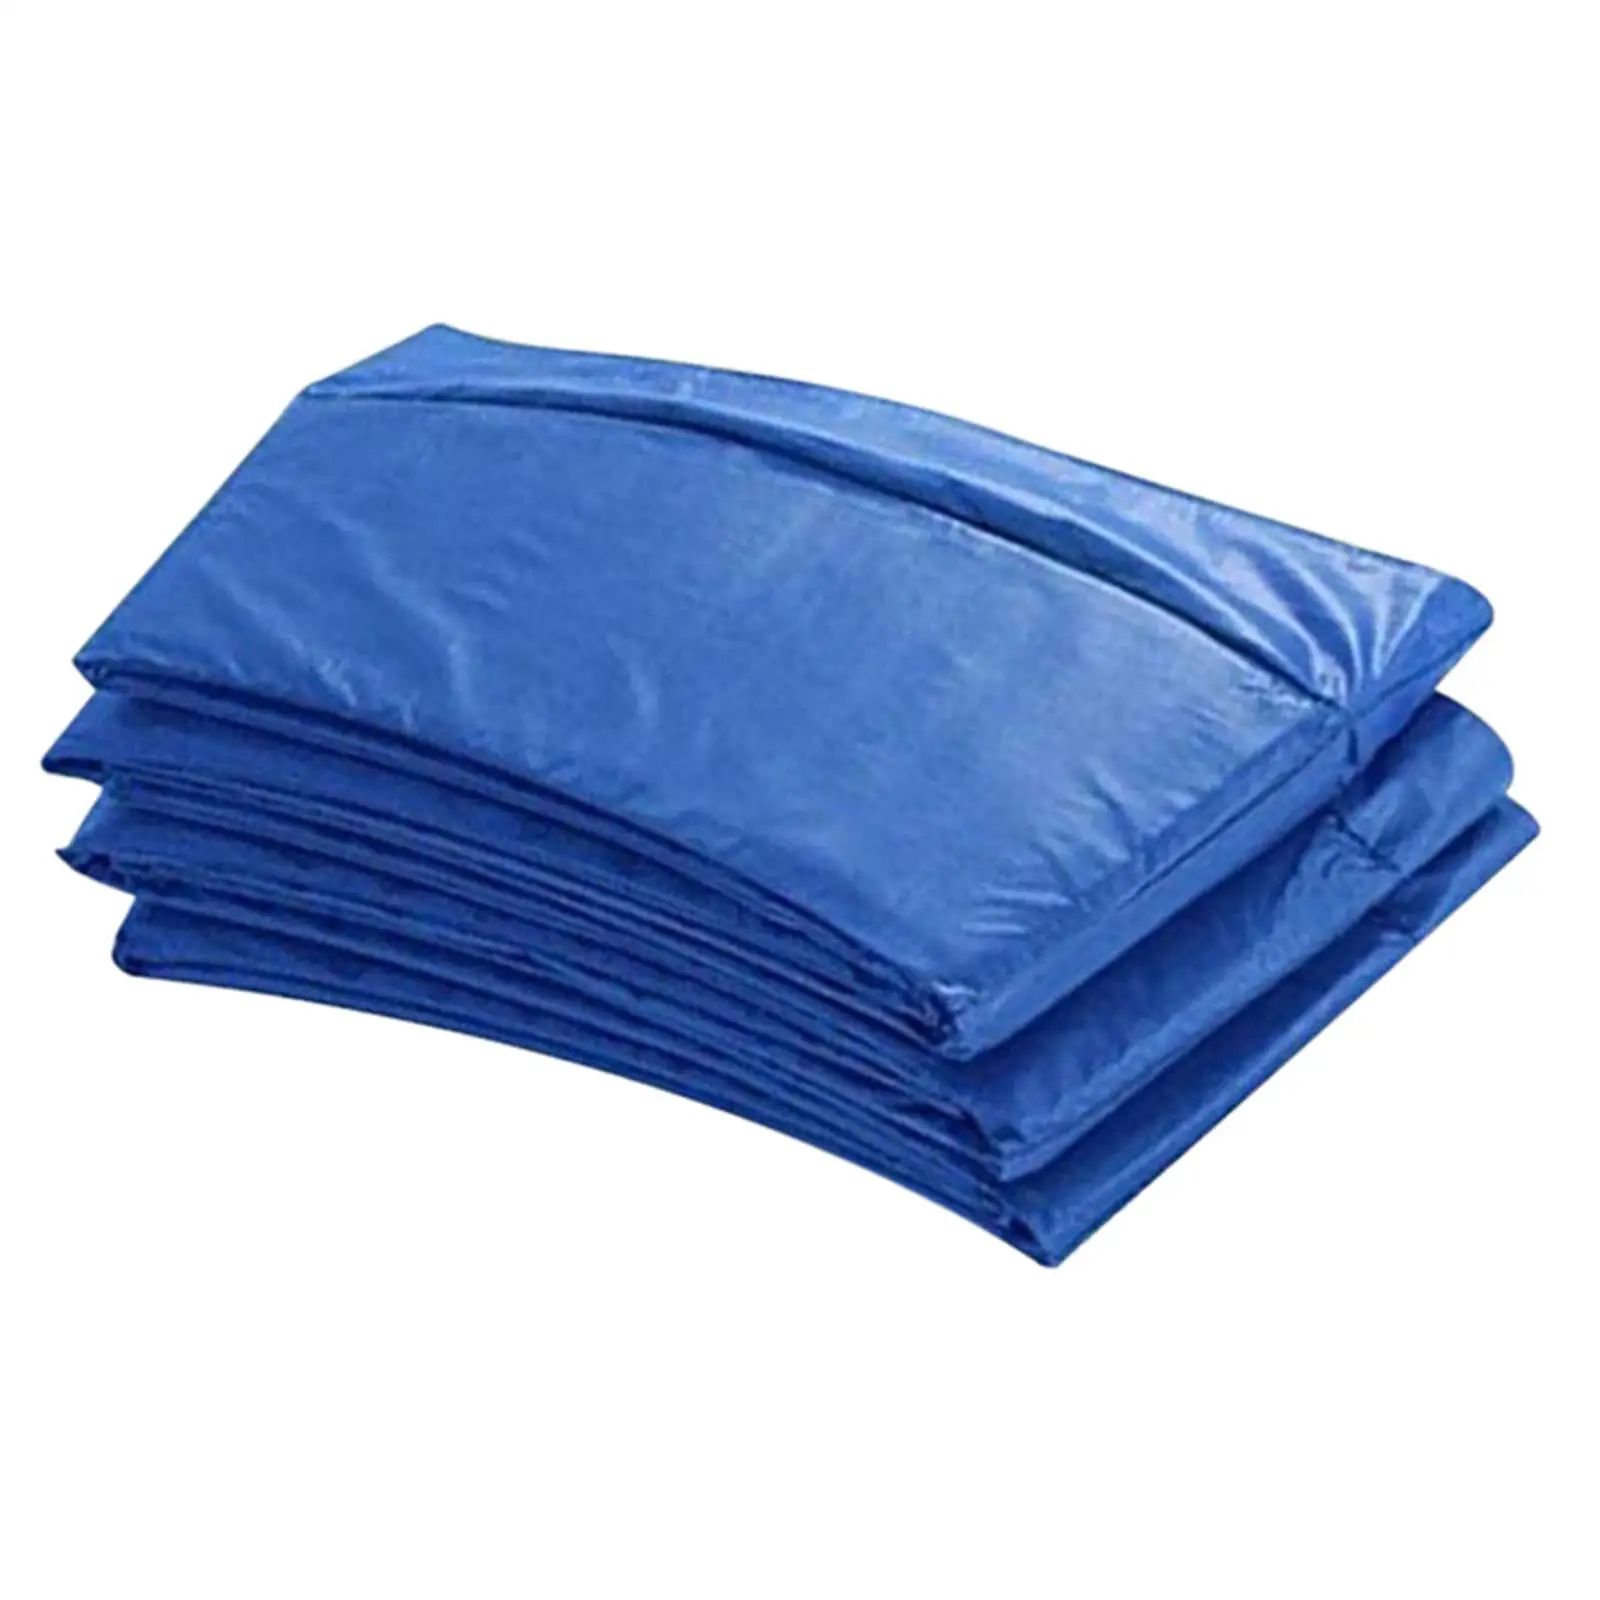 Trampoline Pad Replacement Trampoline Parts Sun Protection Spring Side Cover